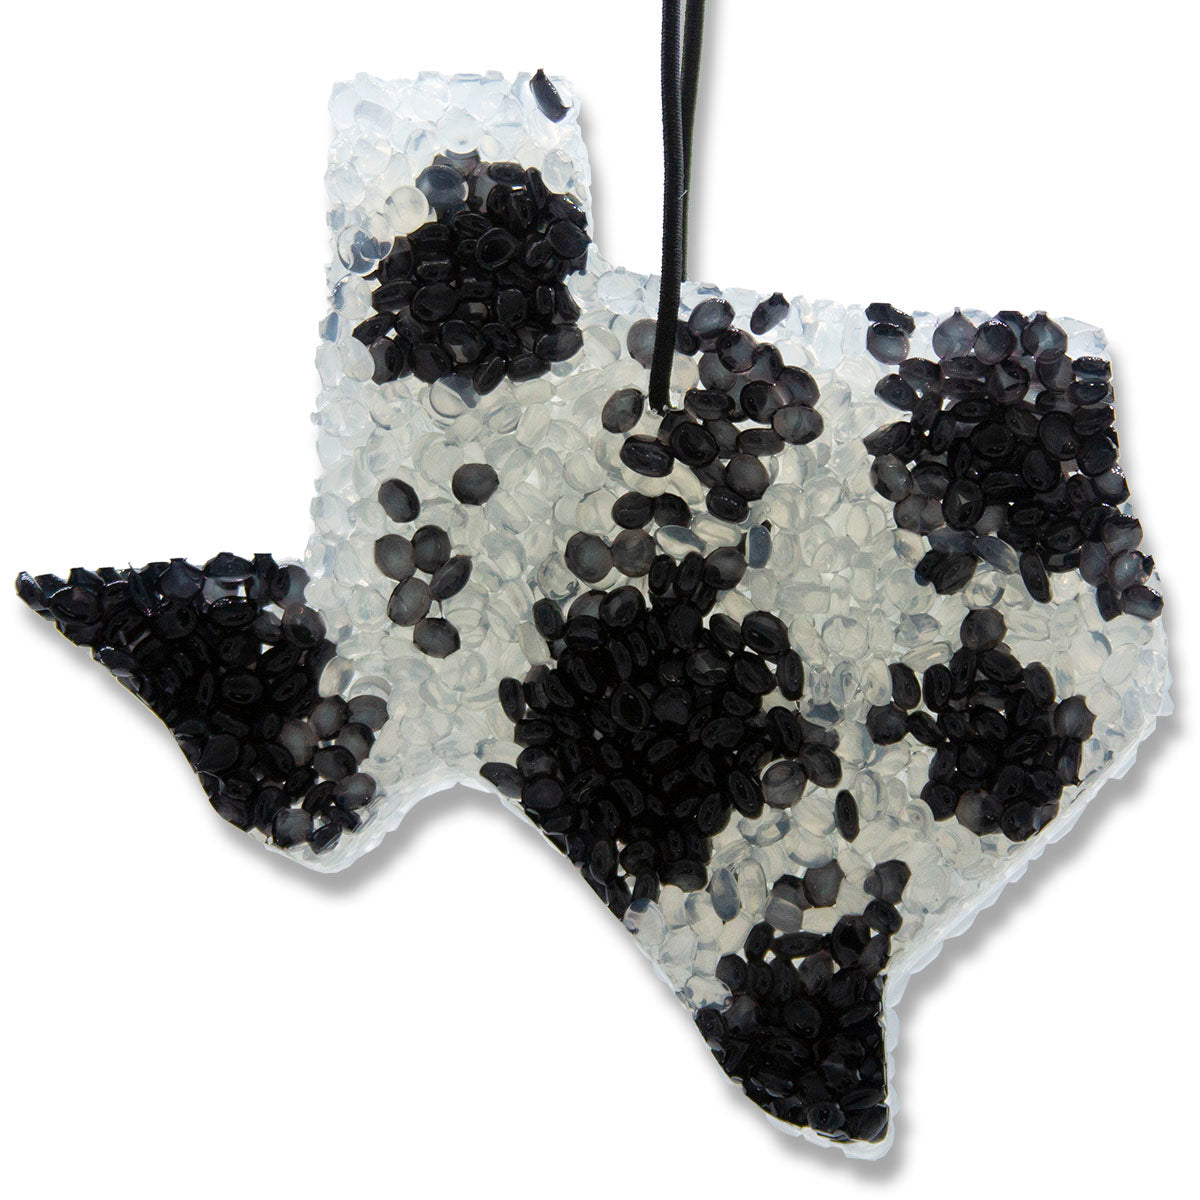 Butt Naked, Lone Star Candles & More's Premium Strongly Scented Freshies, A Popular Masculine Fragrance Blend, Car & Air Freshener, USA Made in Texas, Black TX Cowhide 1-Pack